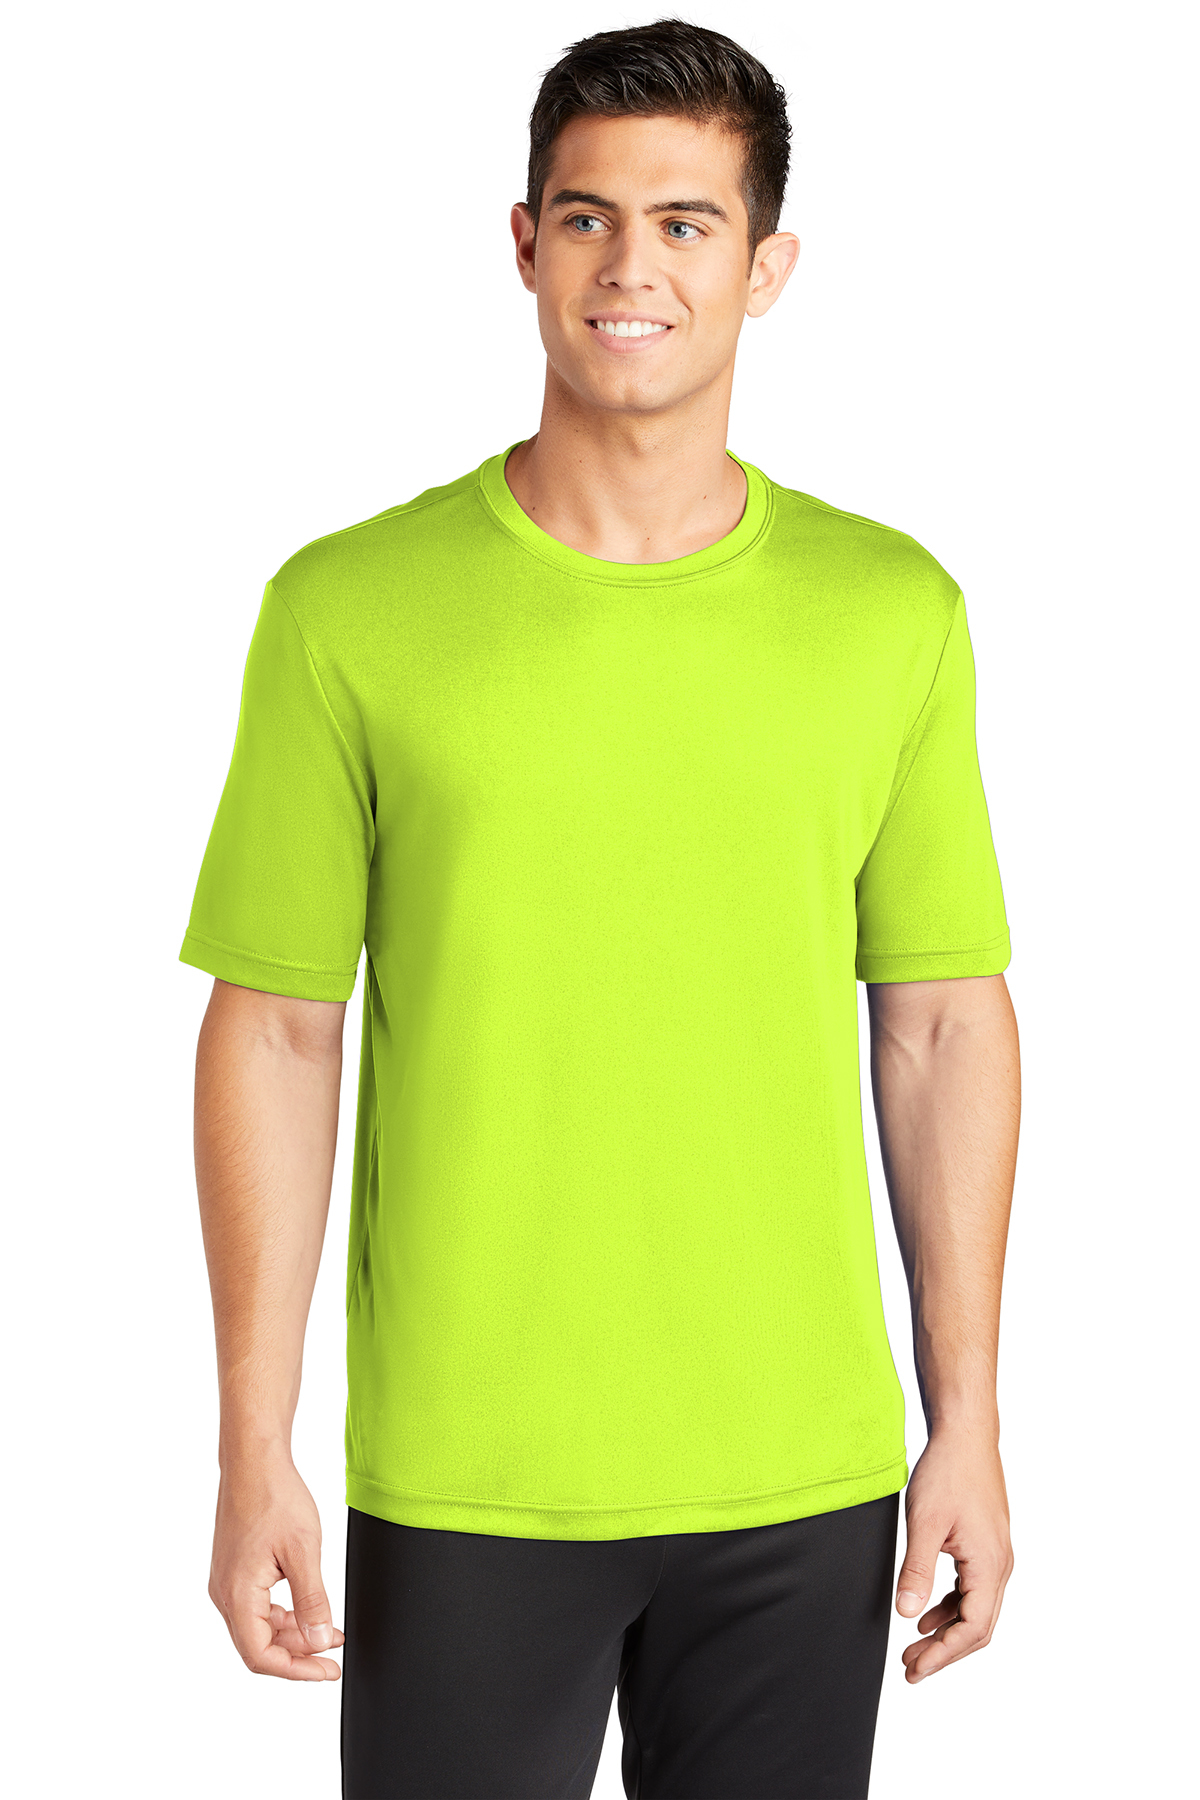 click to view Neon Yellow